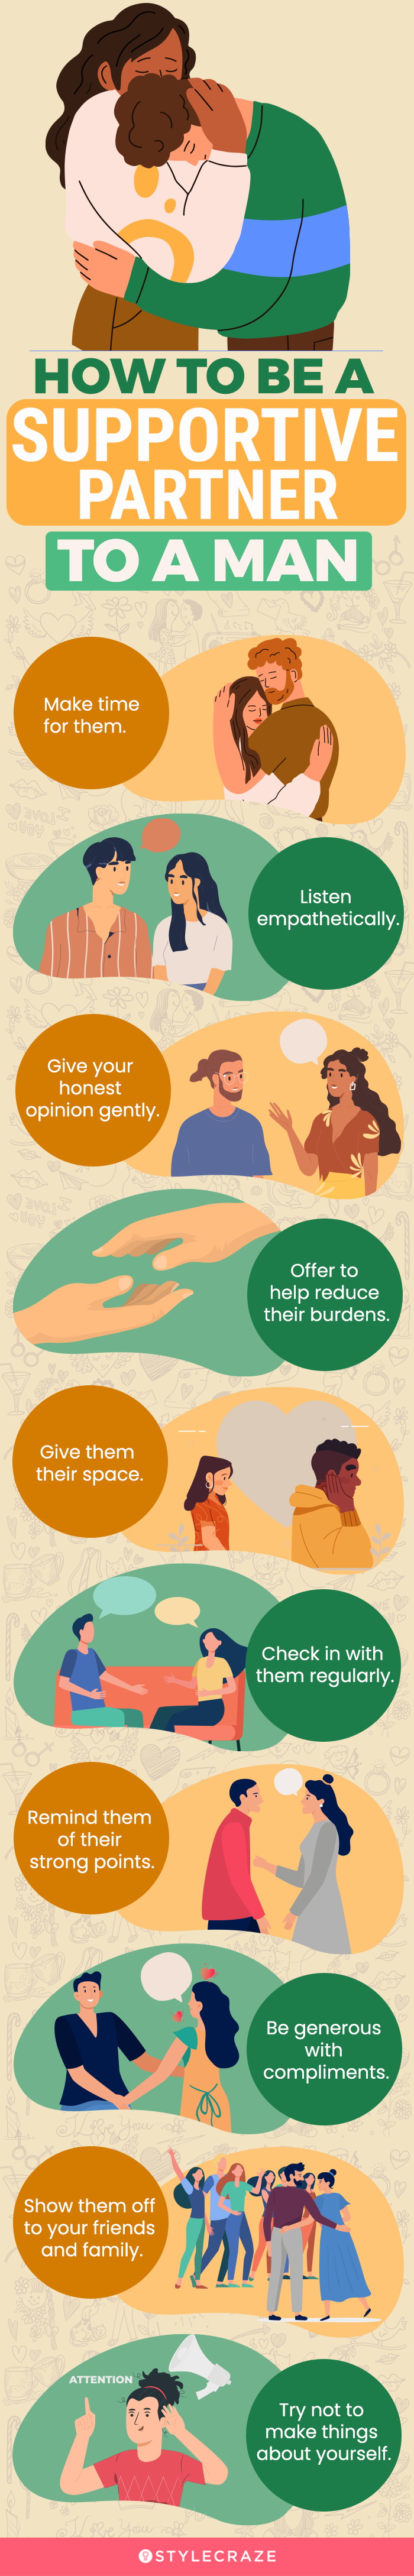 how to be a supportive partner to a man (infographic)